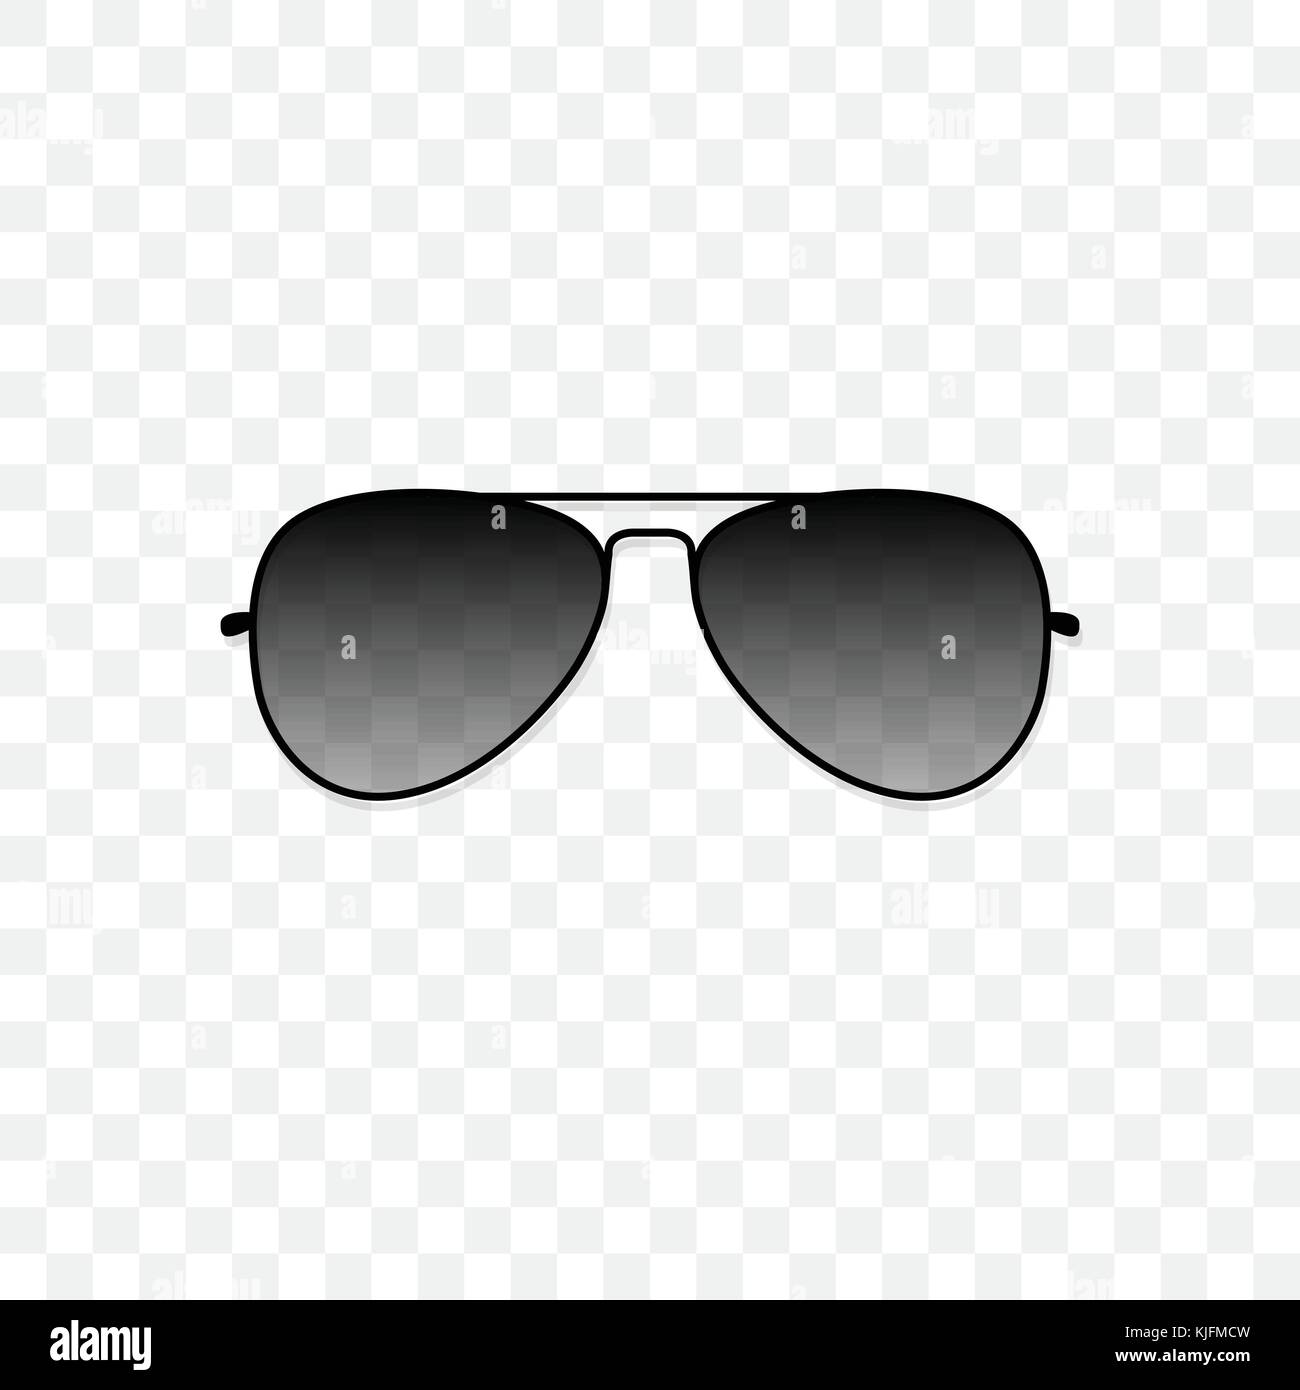 Realistic sunglasses with a translucent black glass on a transparent background. Protection from sun and ultraviolet rays. Fashion accessory vector illustration. Stock Vector